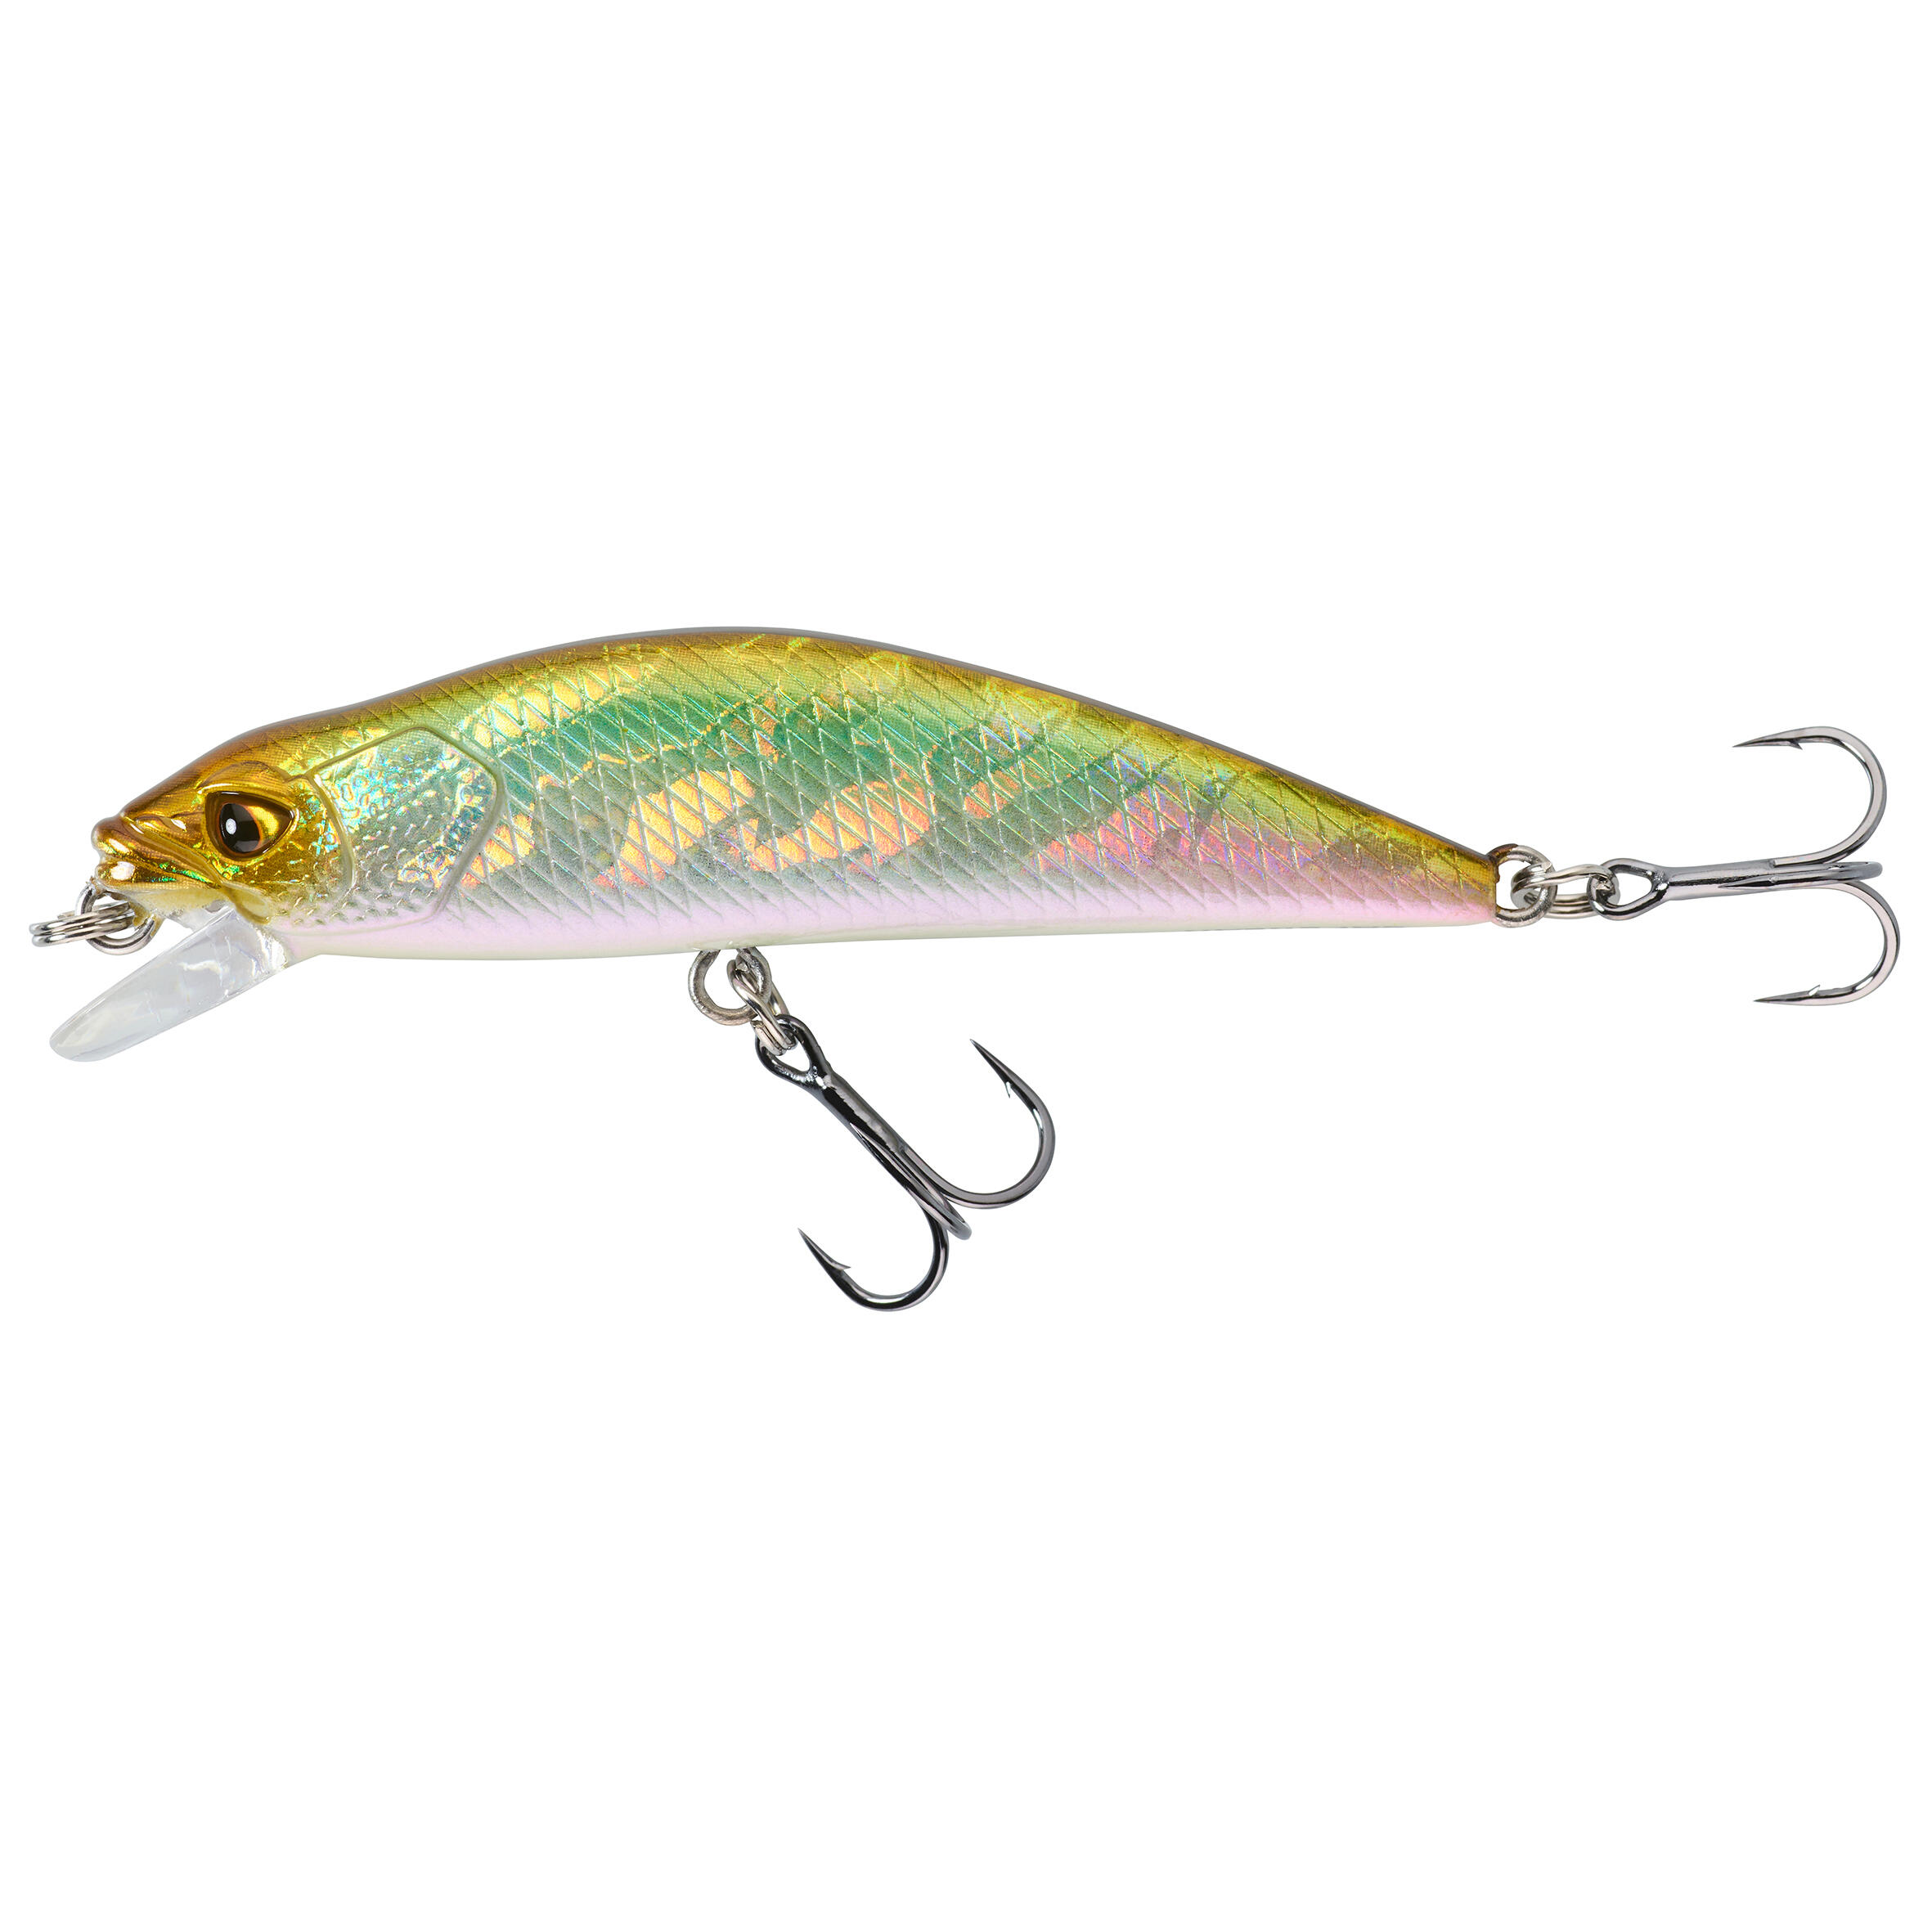 CAPERLAN MINNOW HARD LURE FOR TROUT WXM  MNWFS 65 US - GREEN BACK